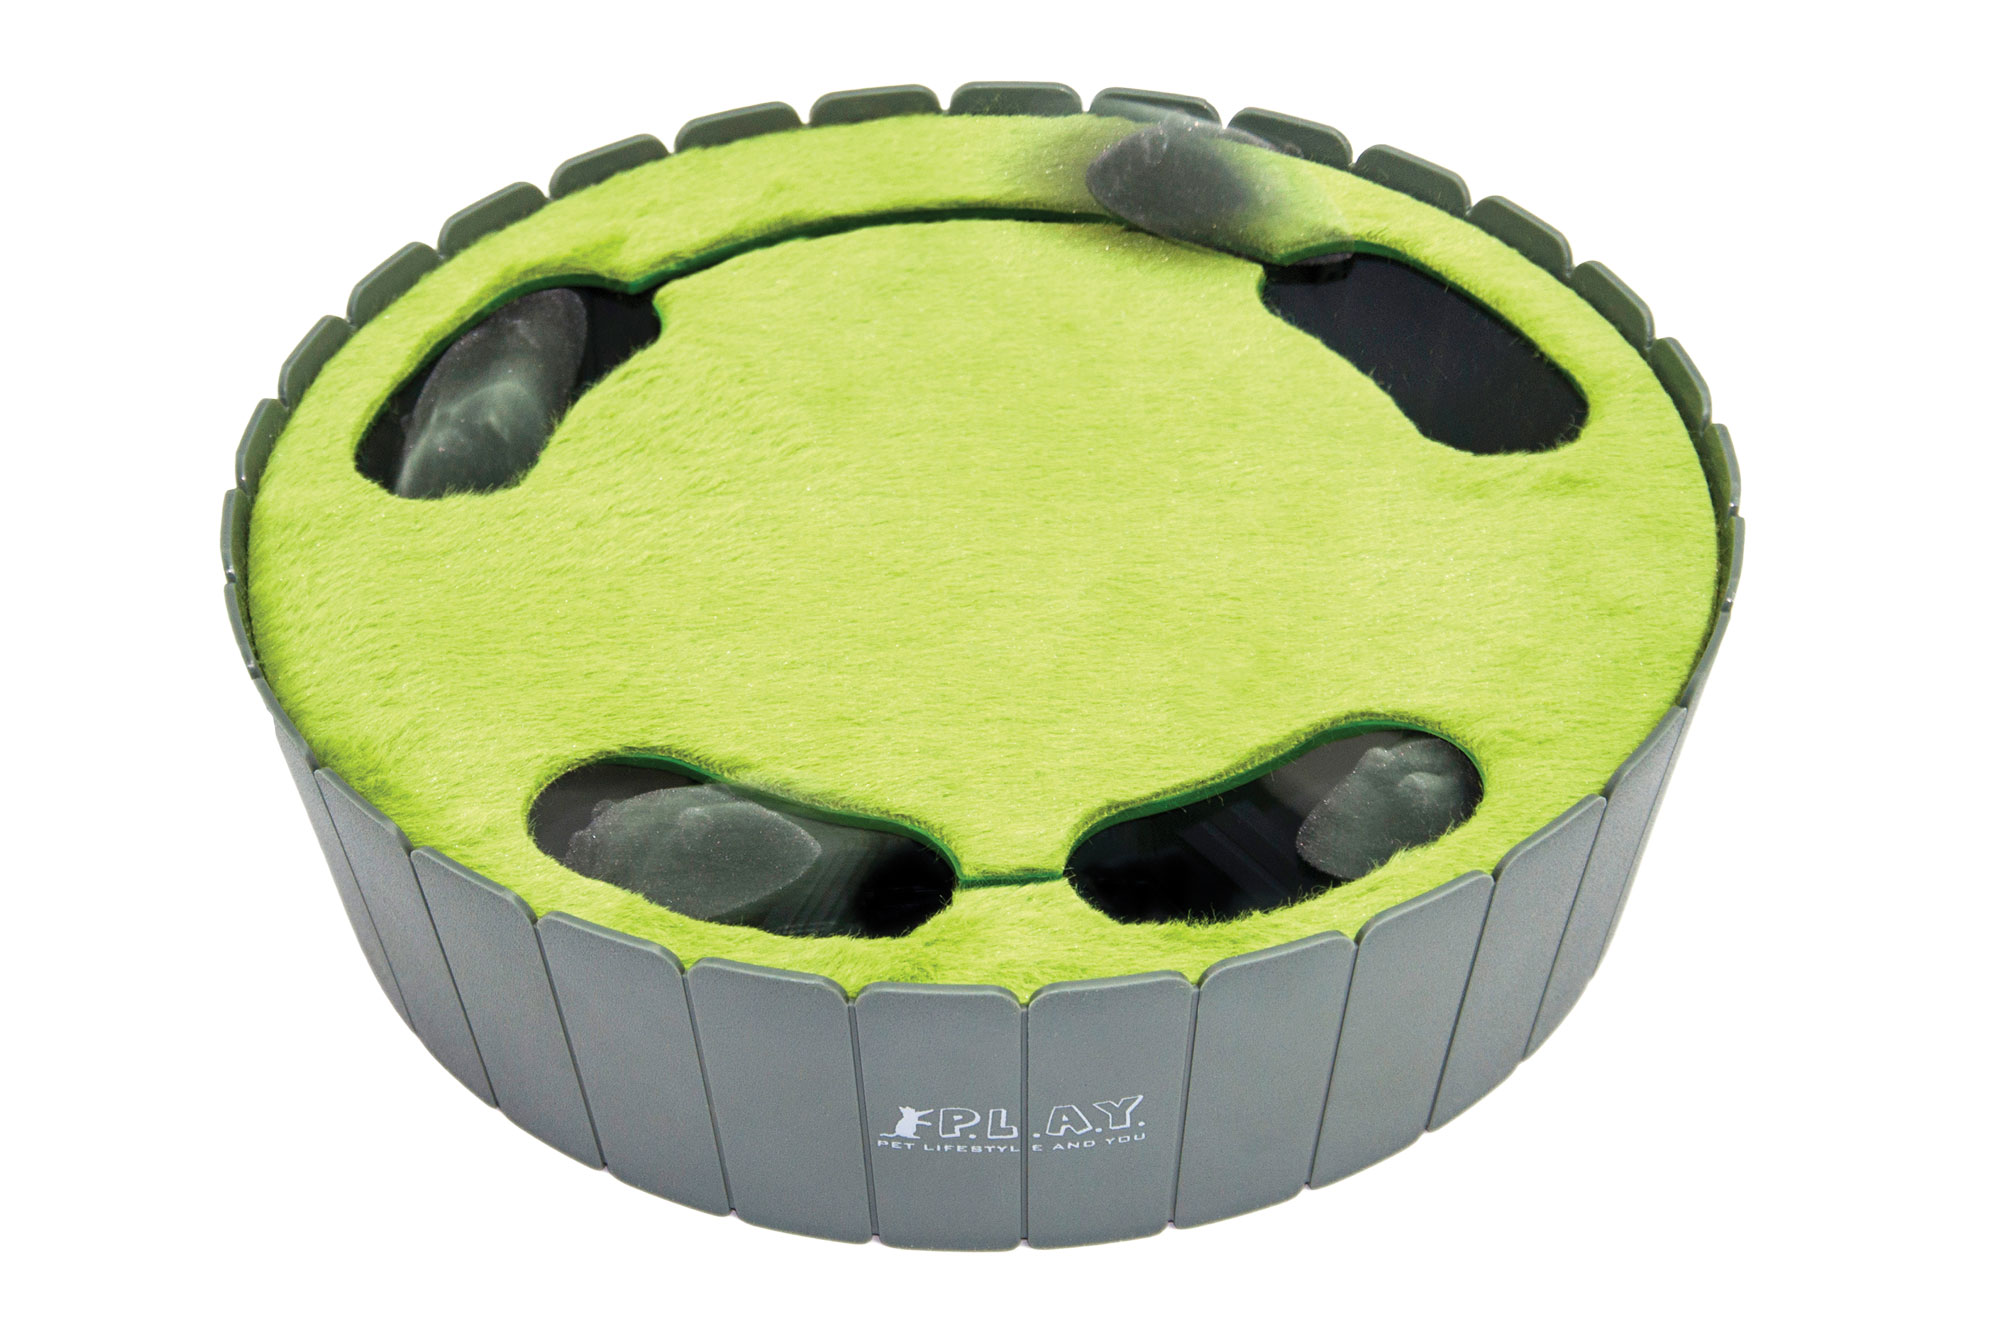 P.L.A.Y. Peek-a-Boo Mouse Interactive Cat Toy